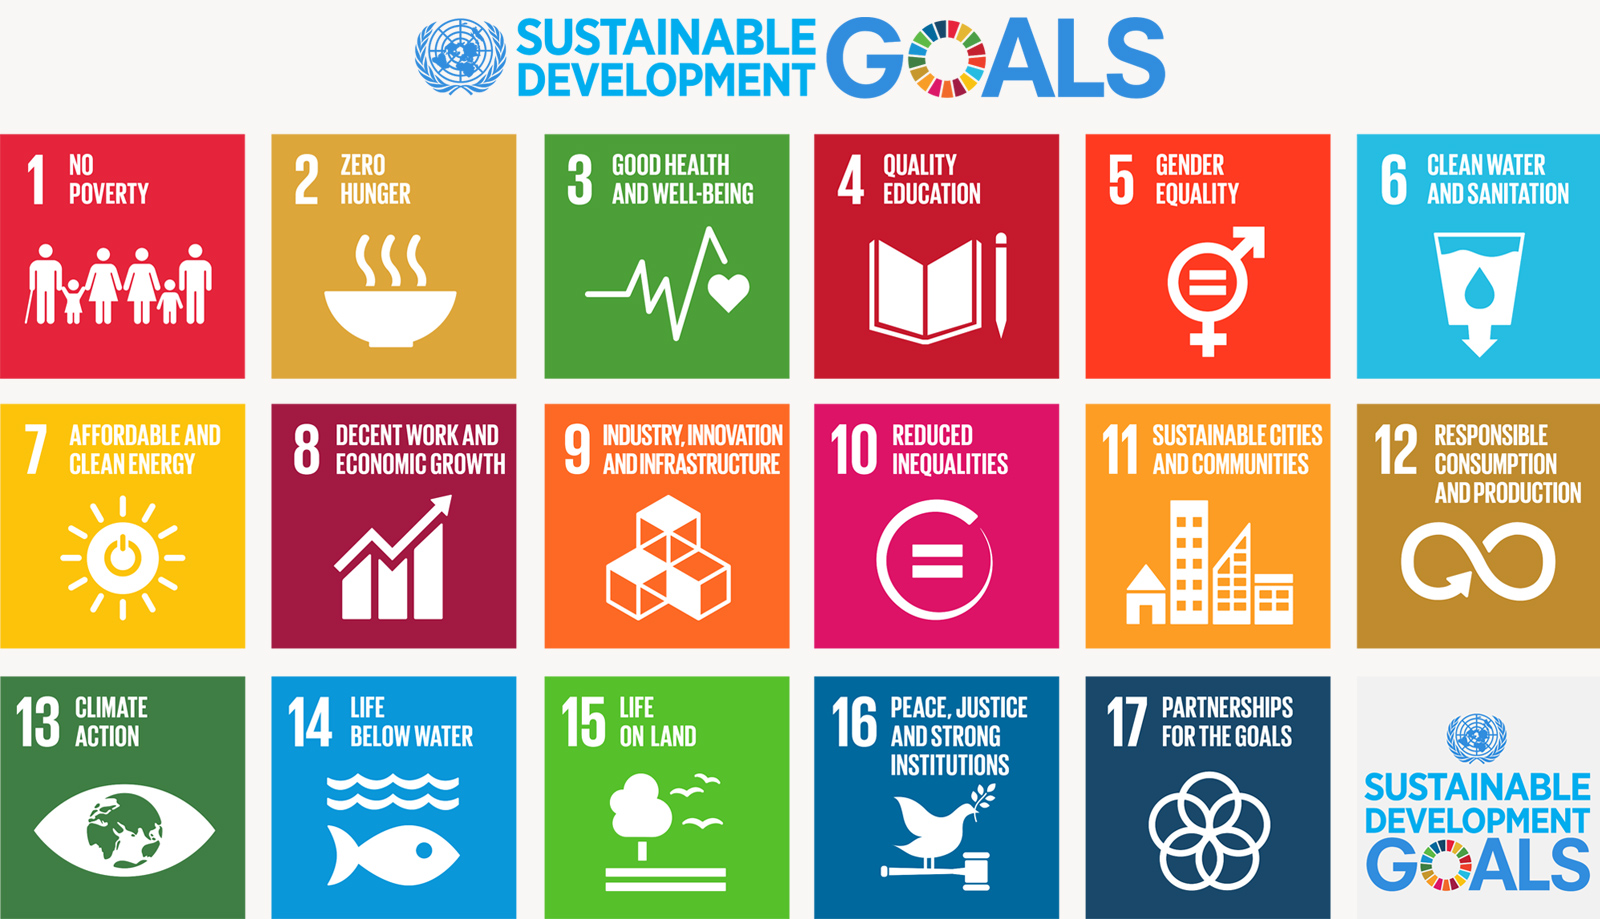 Sustainable Development Goals | What is Sustainability?